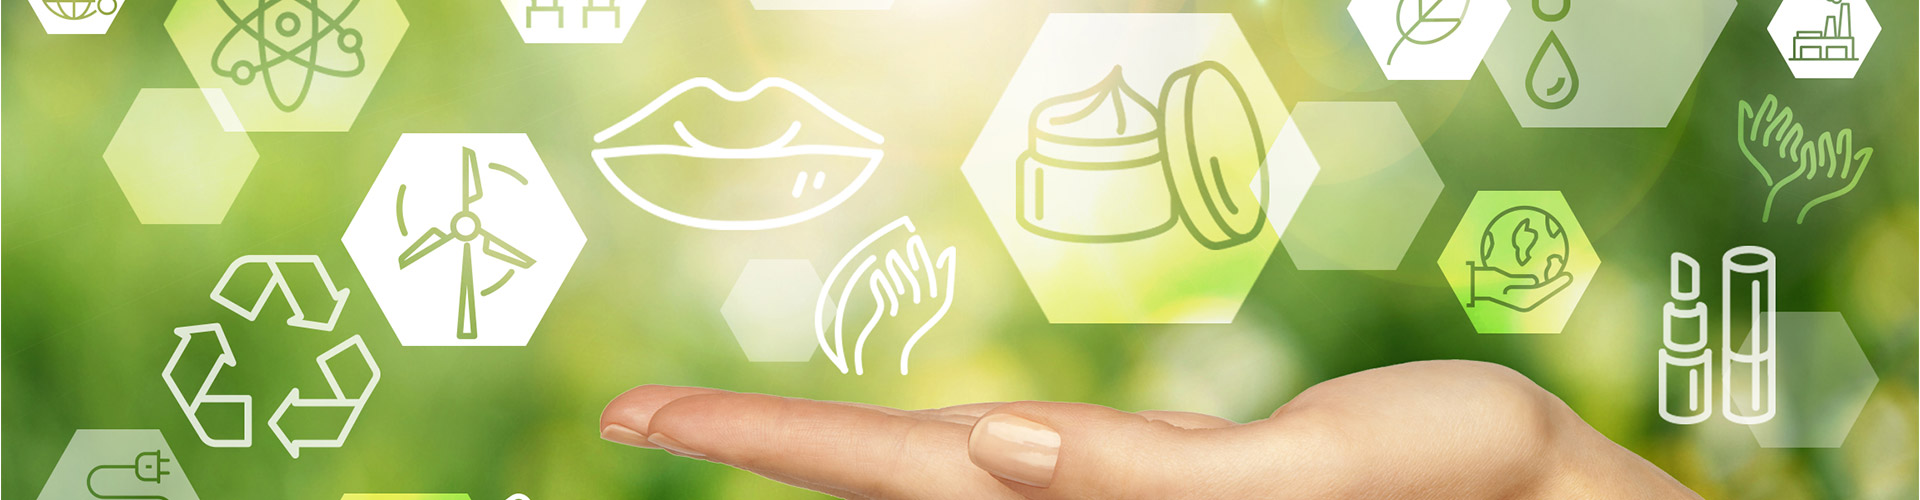 Beauty & Wellness With Purpose blog banner featuring hand with floating beauty product icon above it and sustainability icons in background